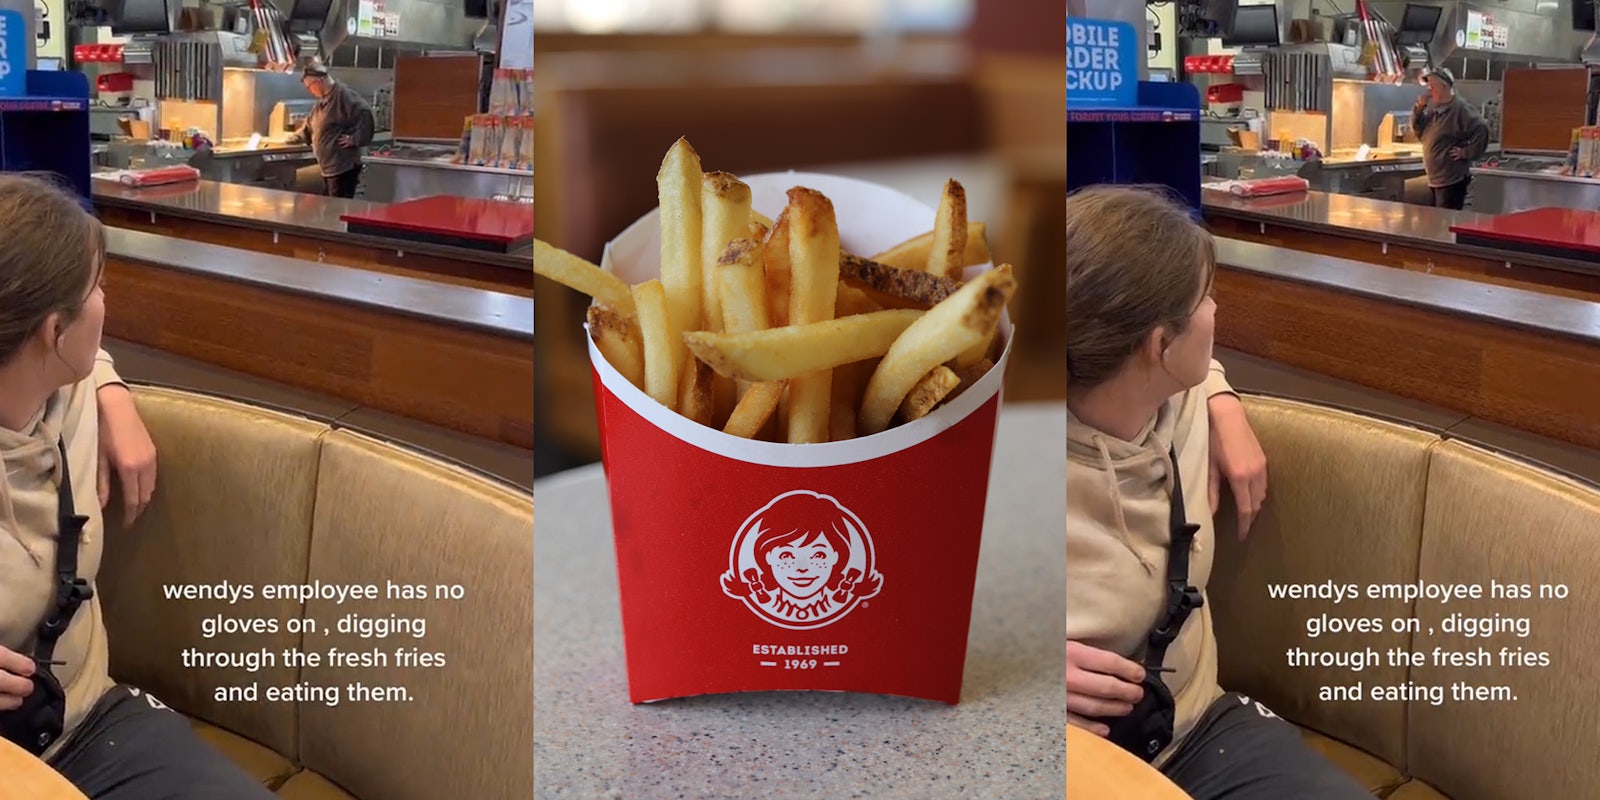 woman sitting at Wendy's watching employee dig hands into fries caption 'wendys employee has no gloves on, digging through fresh fries and eating them.' (l) Wendy's fries in branded packaging on table (c) woman sitting at Wendy's watching employee eating fries caption 'wendys employee has no gloves on, digging through fresh fries and eating them.' (r)